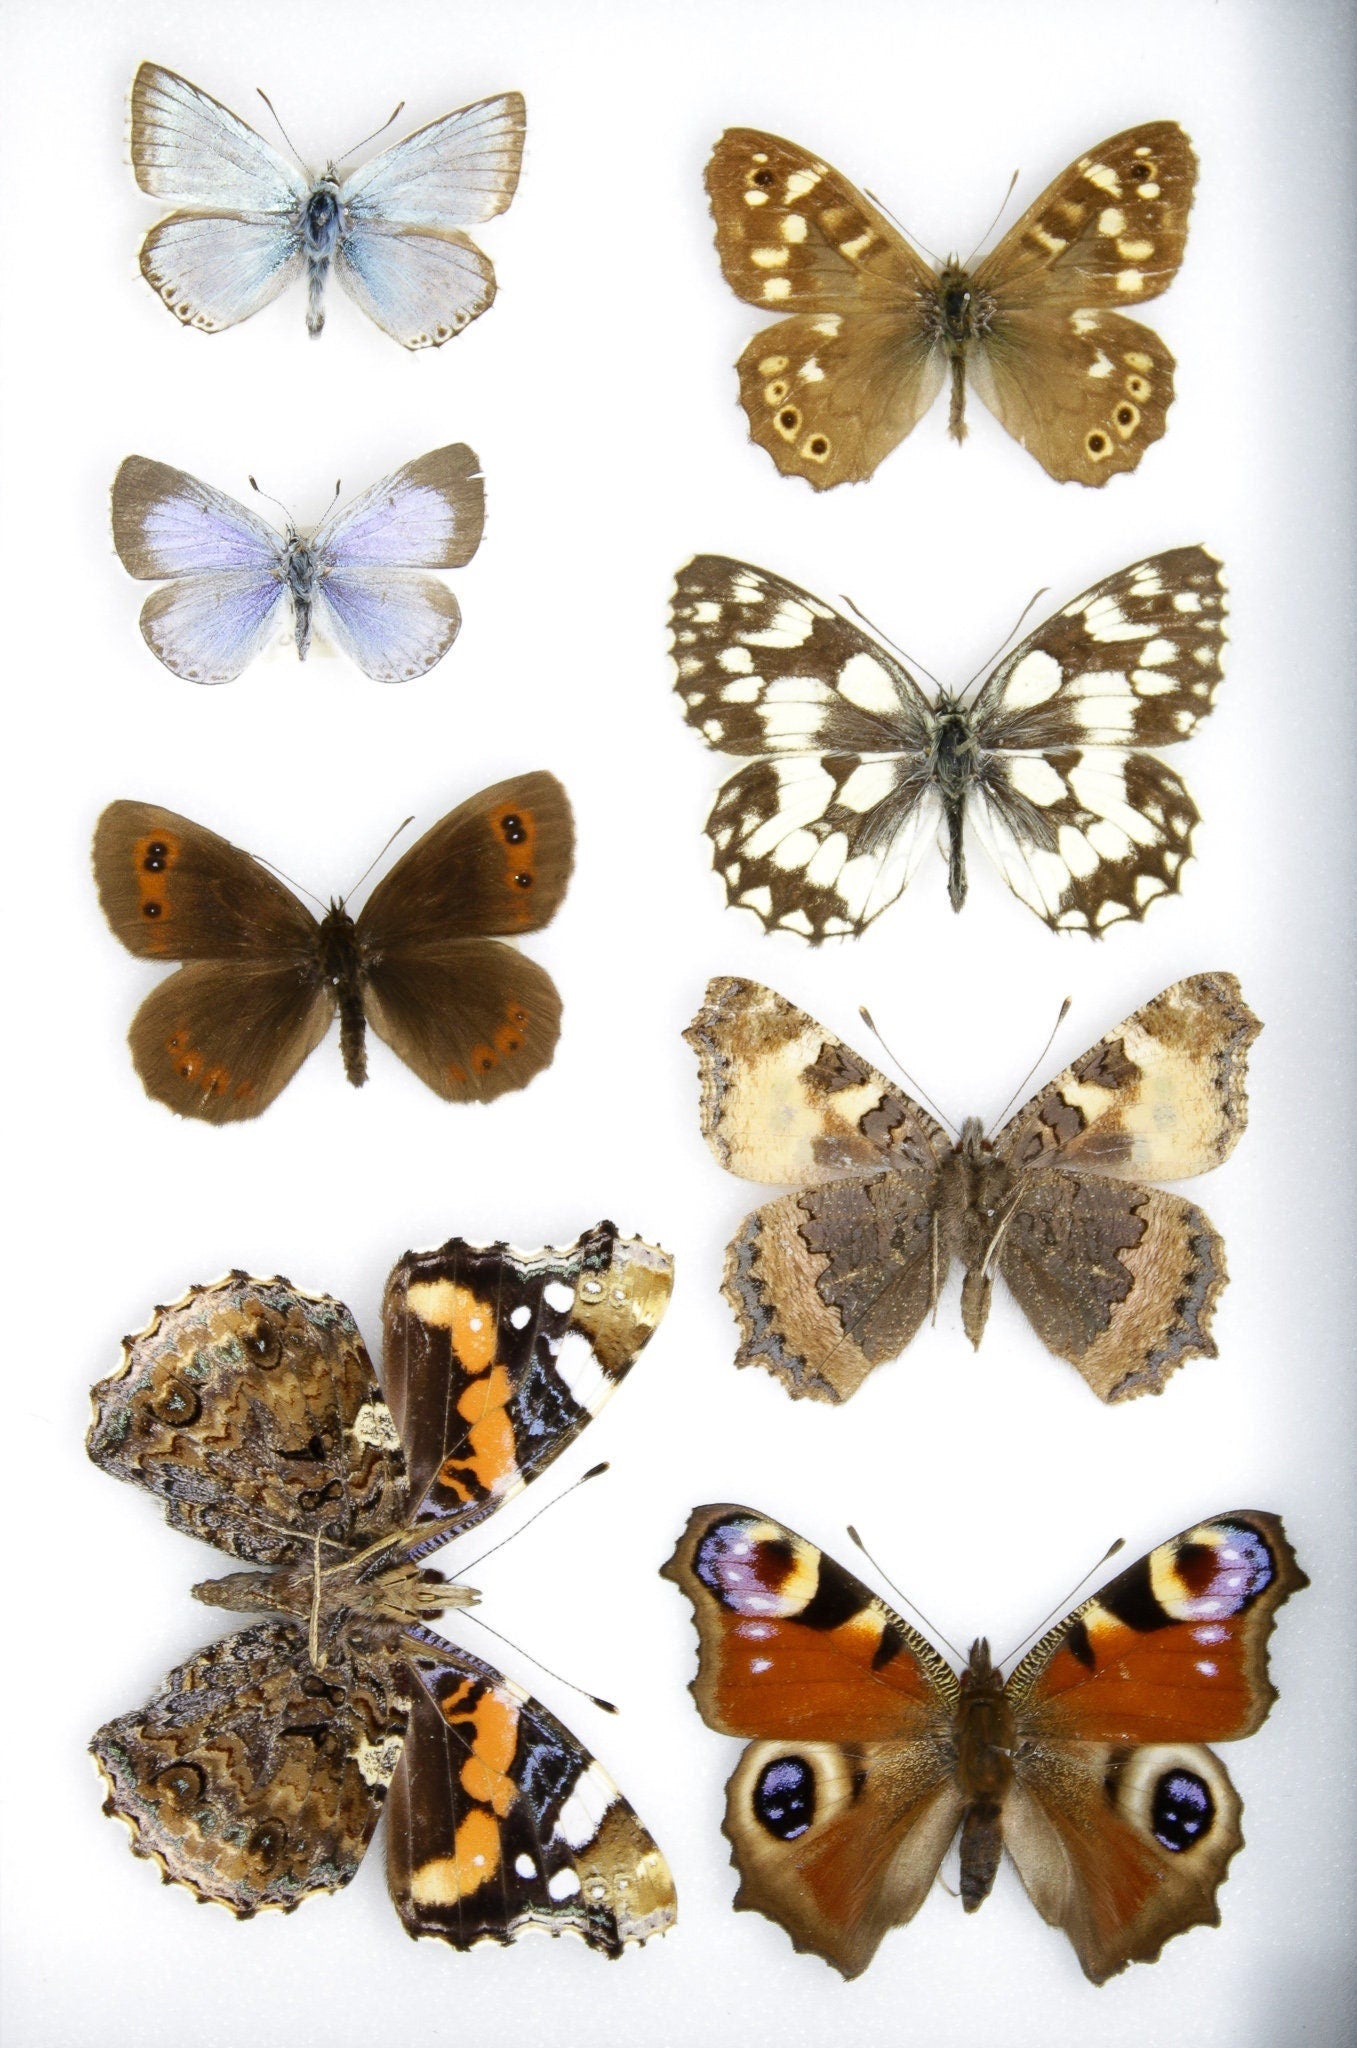 A Collection of Palearctic Butterflies with Scientific Collection Data, A1 Quality, Entomology, Real Lepidoptera Specimens #SE14